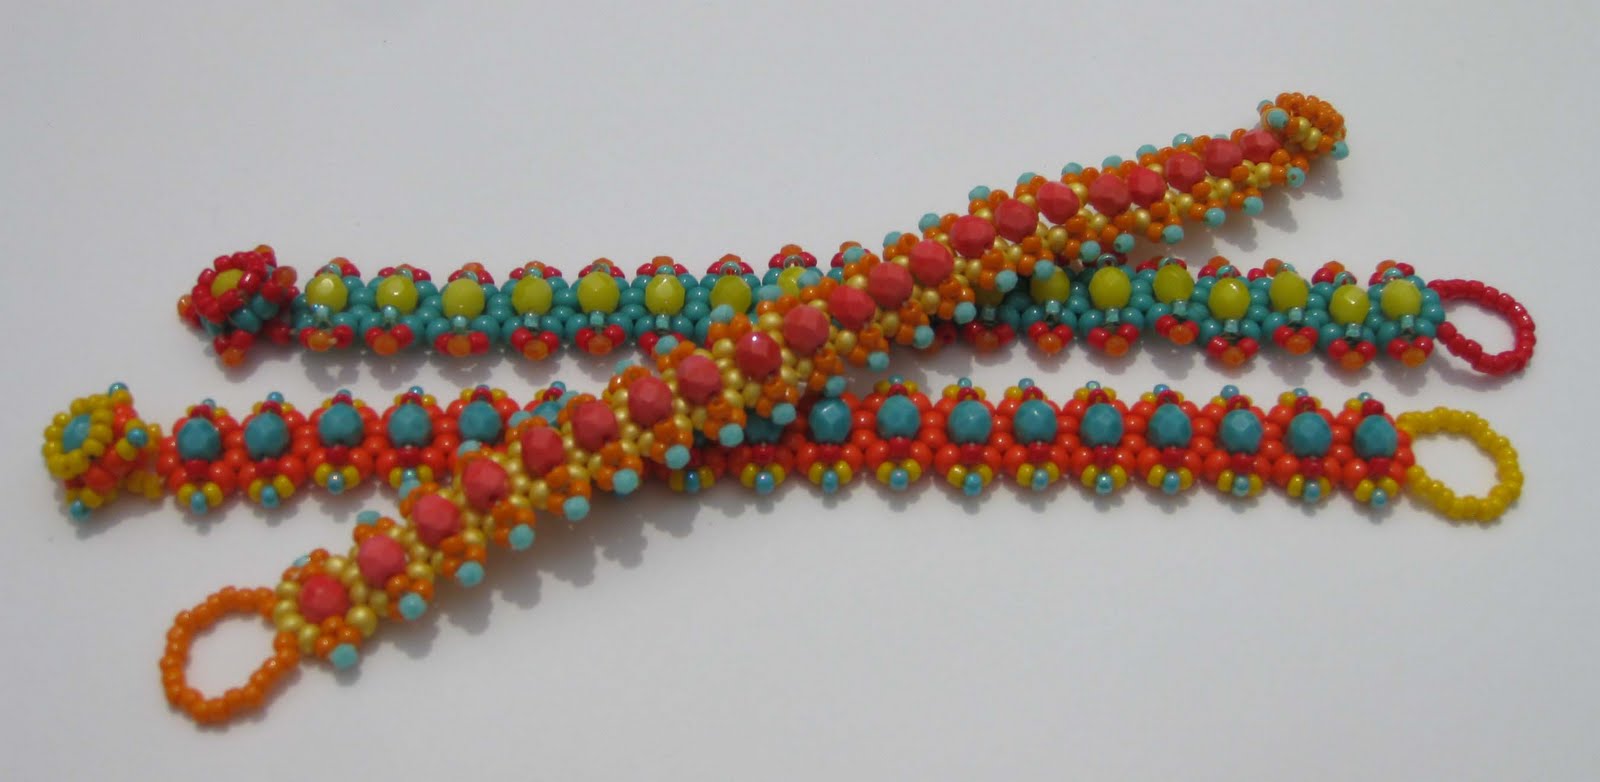 Bead Inspired: Some More Beading Projects